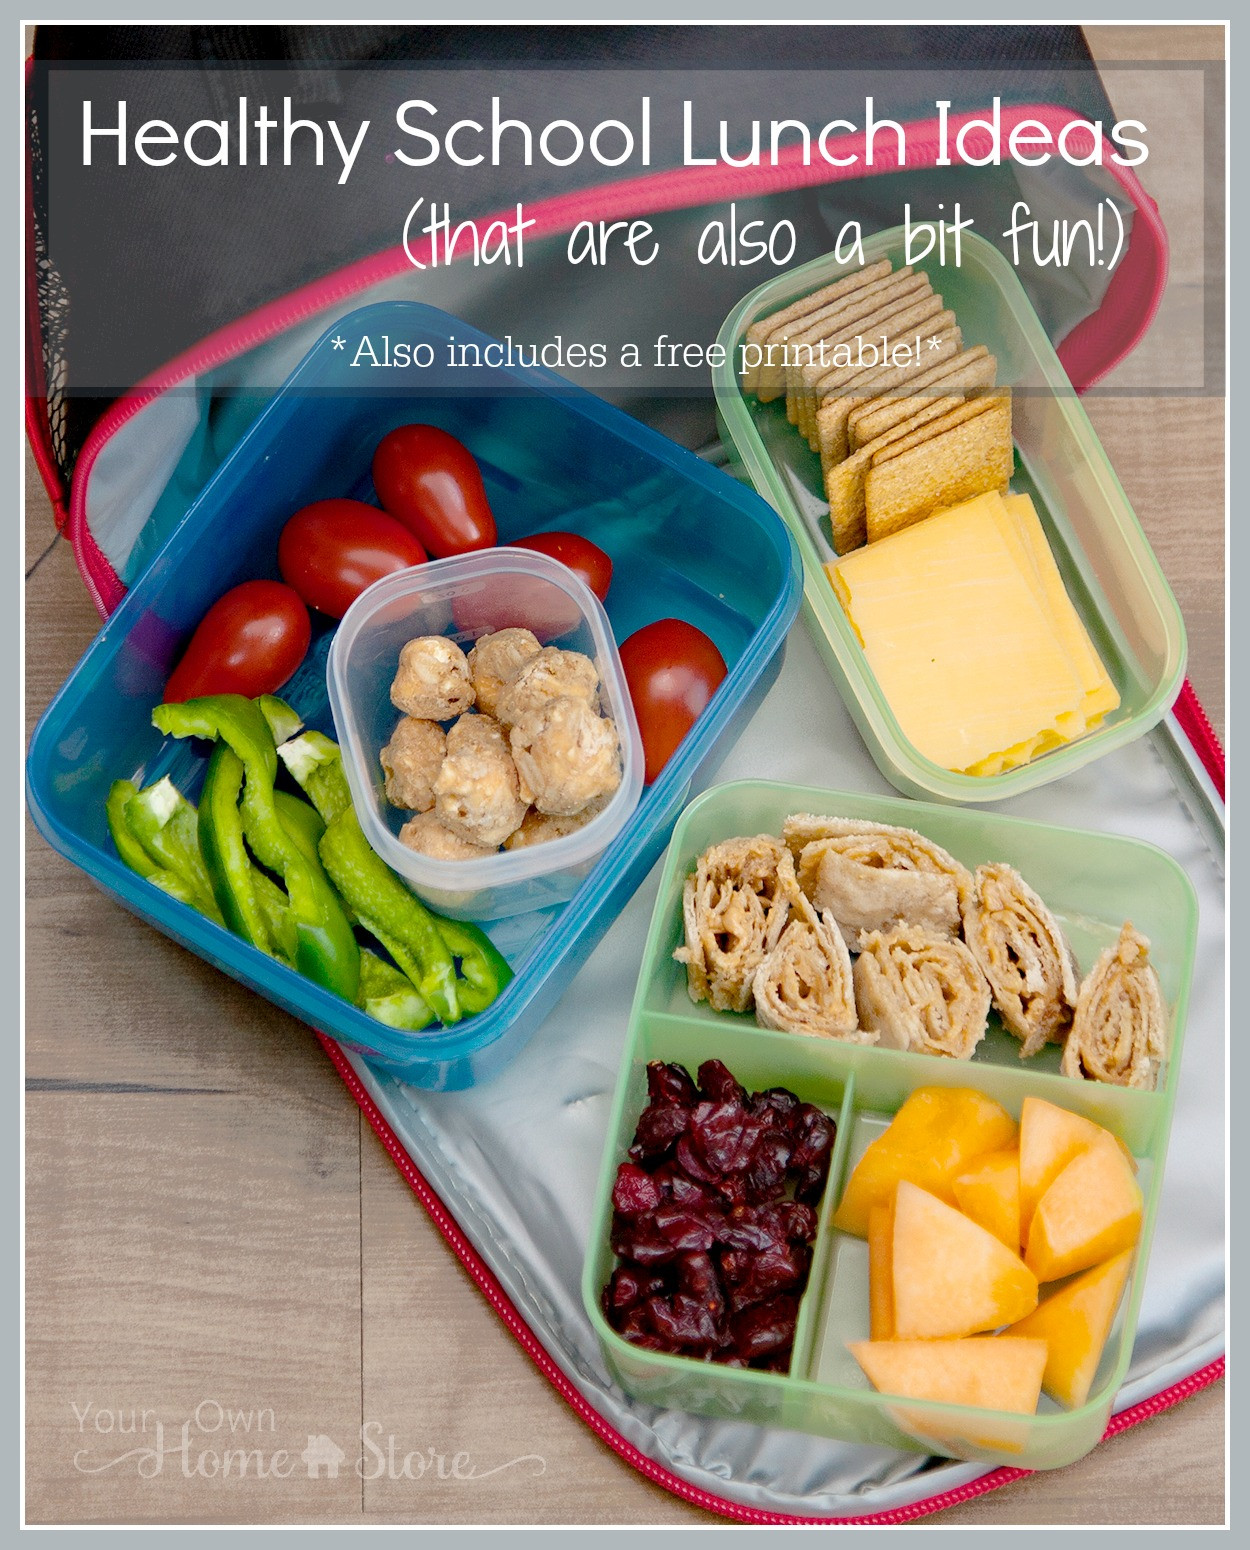 Are School Lunches Healthy
 Healthy school lunch ideas that are also a bit fun